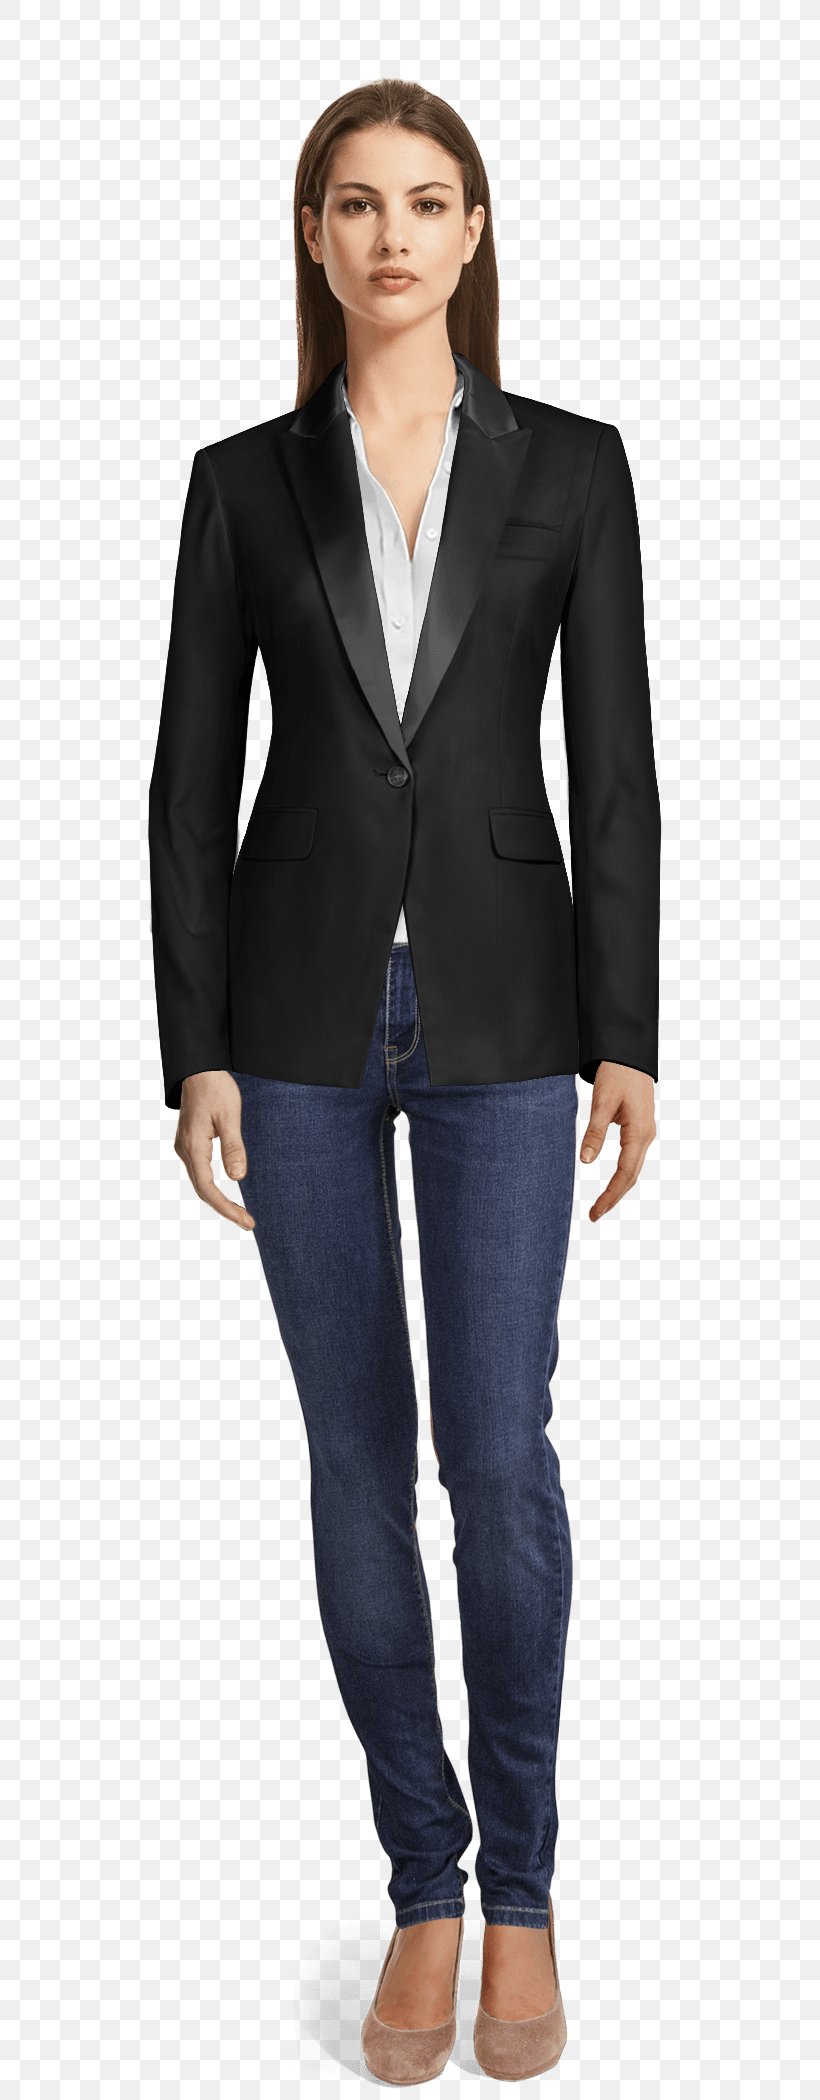 Pant Suits Clothing Blazer Double-breasted, PNG, 655x2100px, Suit, Blazer, Blue, Business, Businessperson Download Free